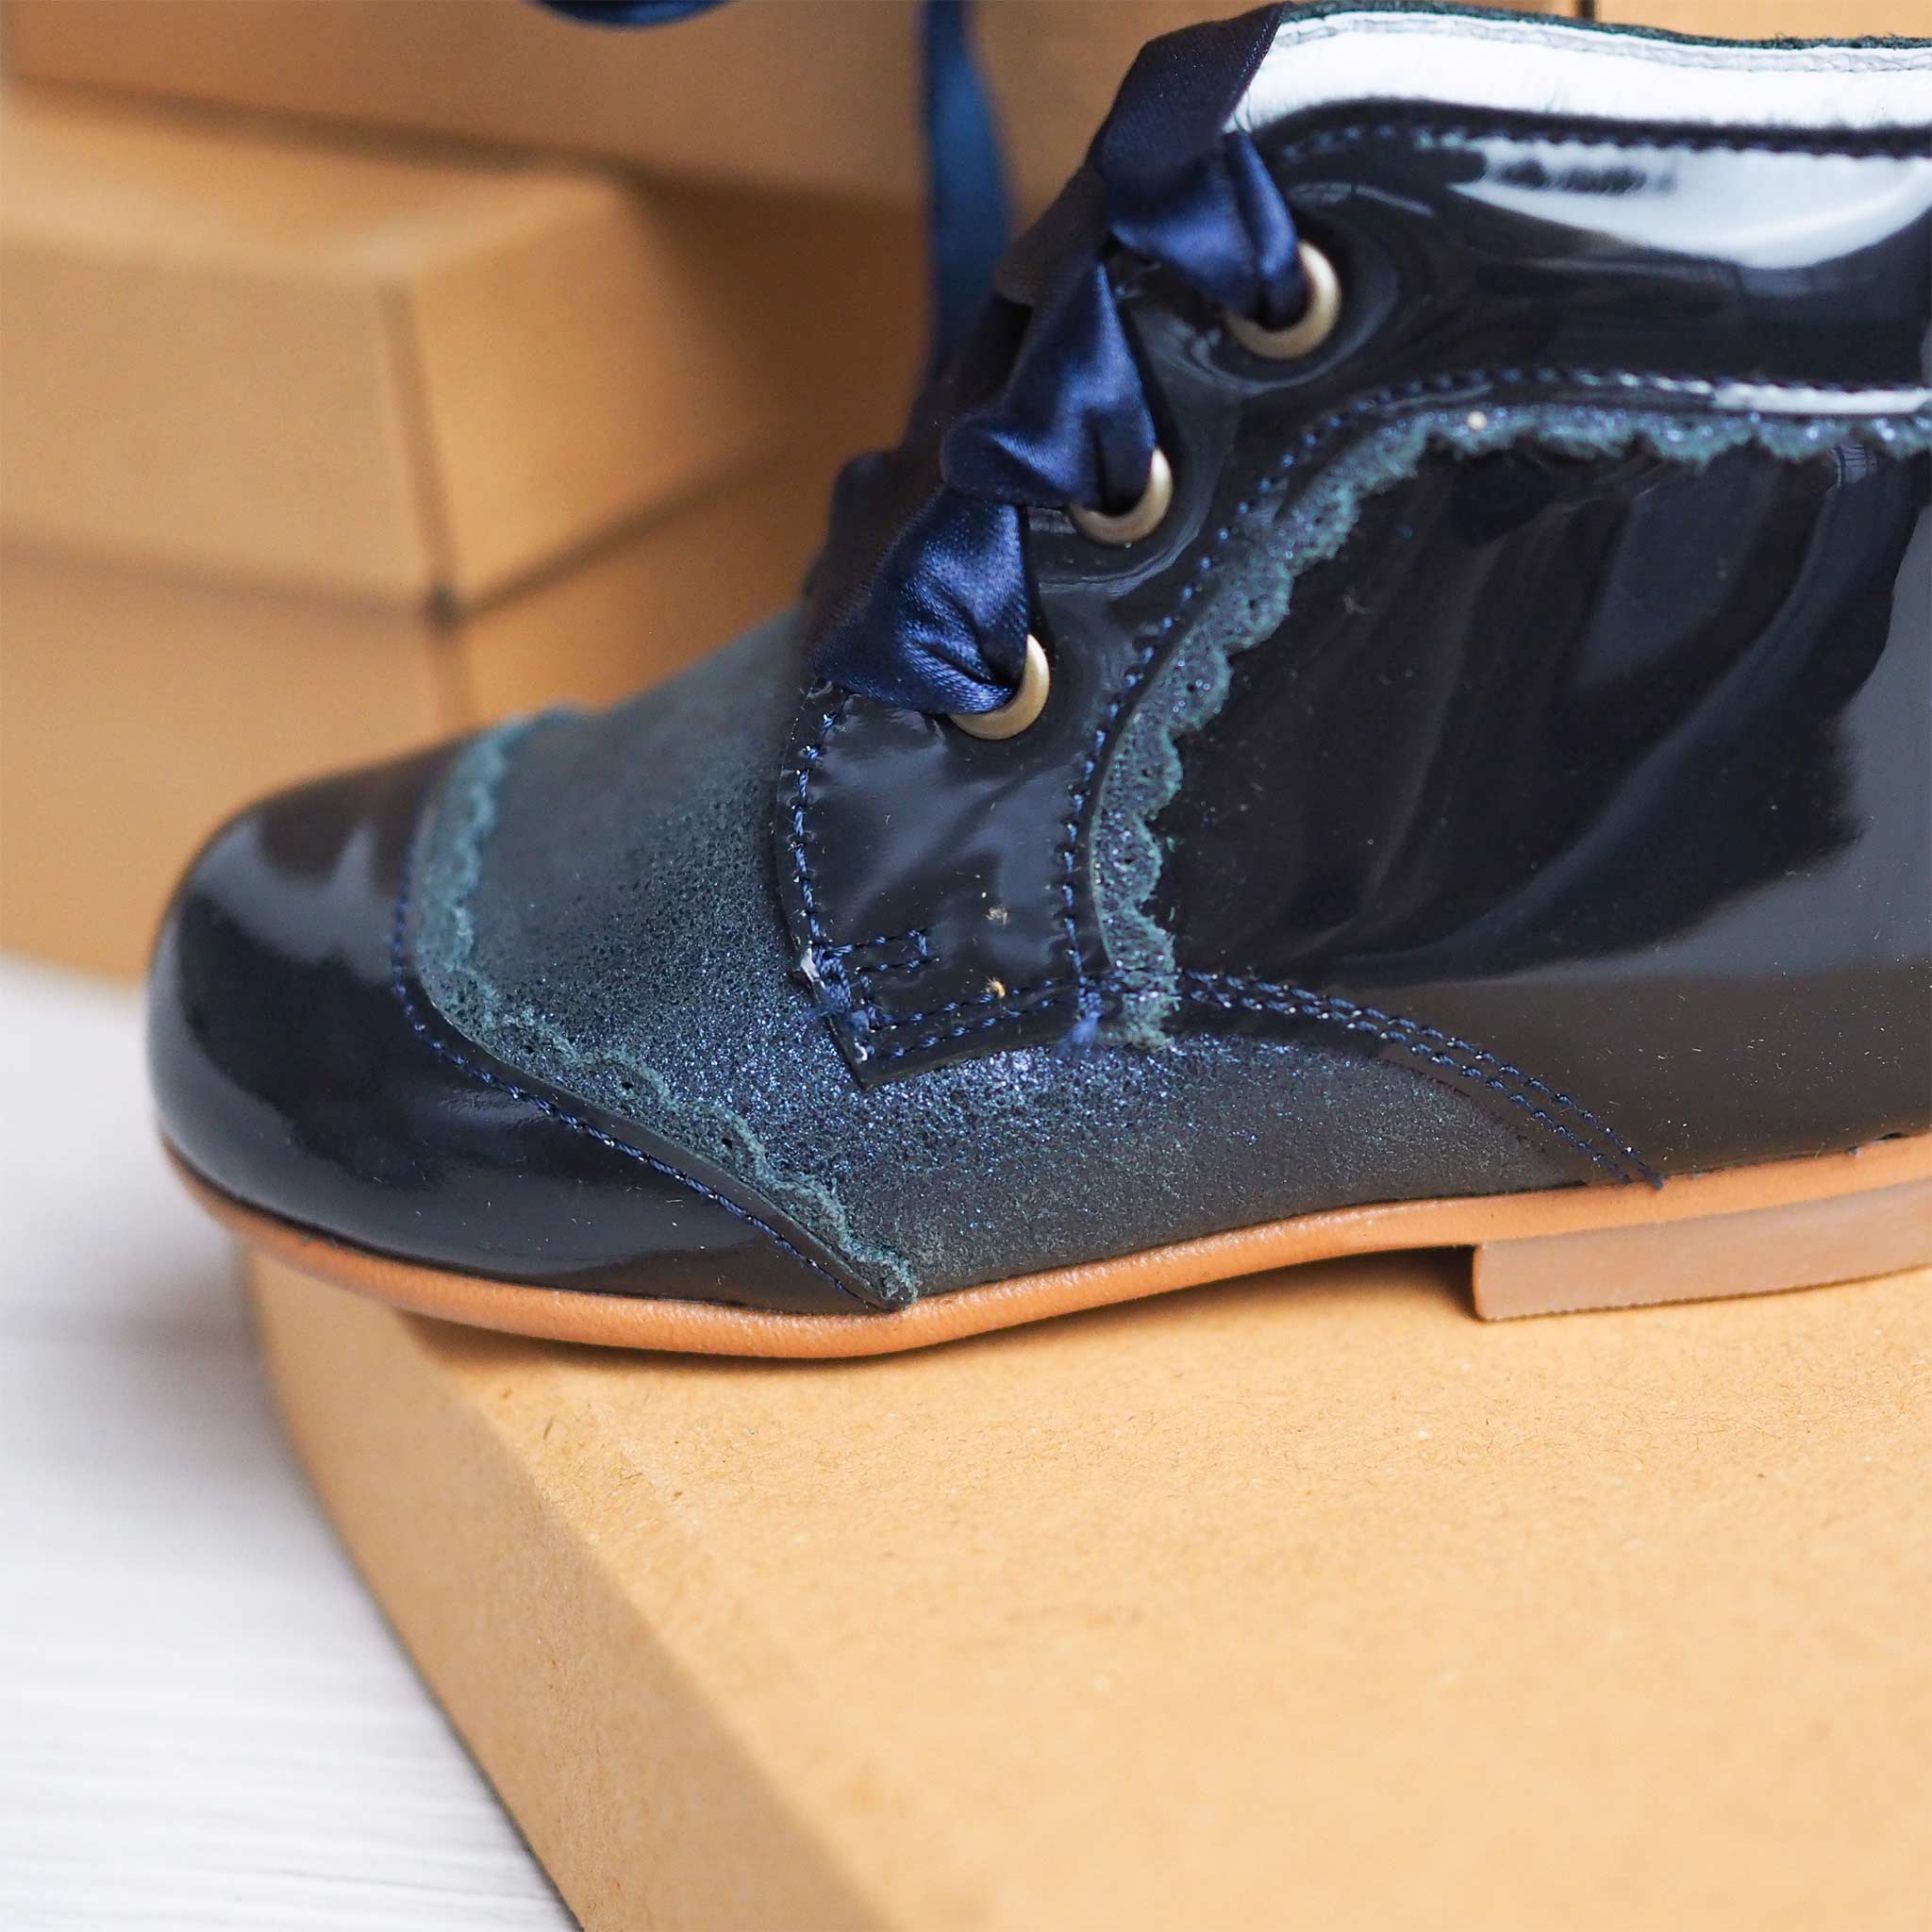 patent leather navy & glitter girls boots